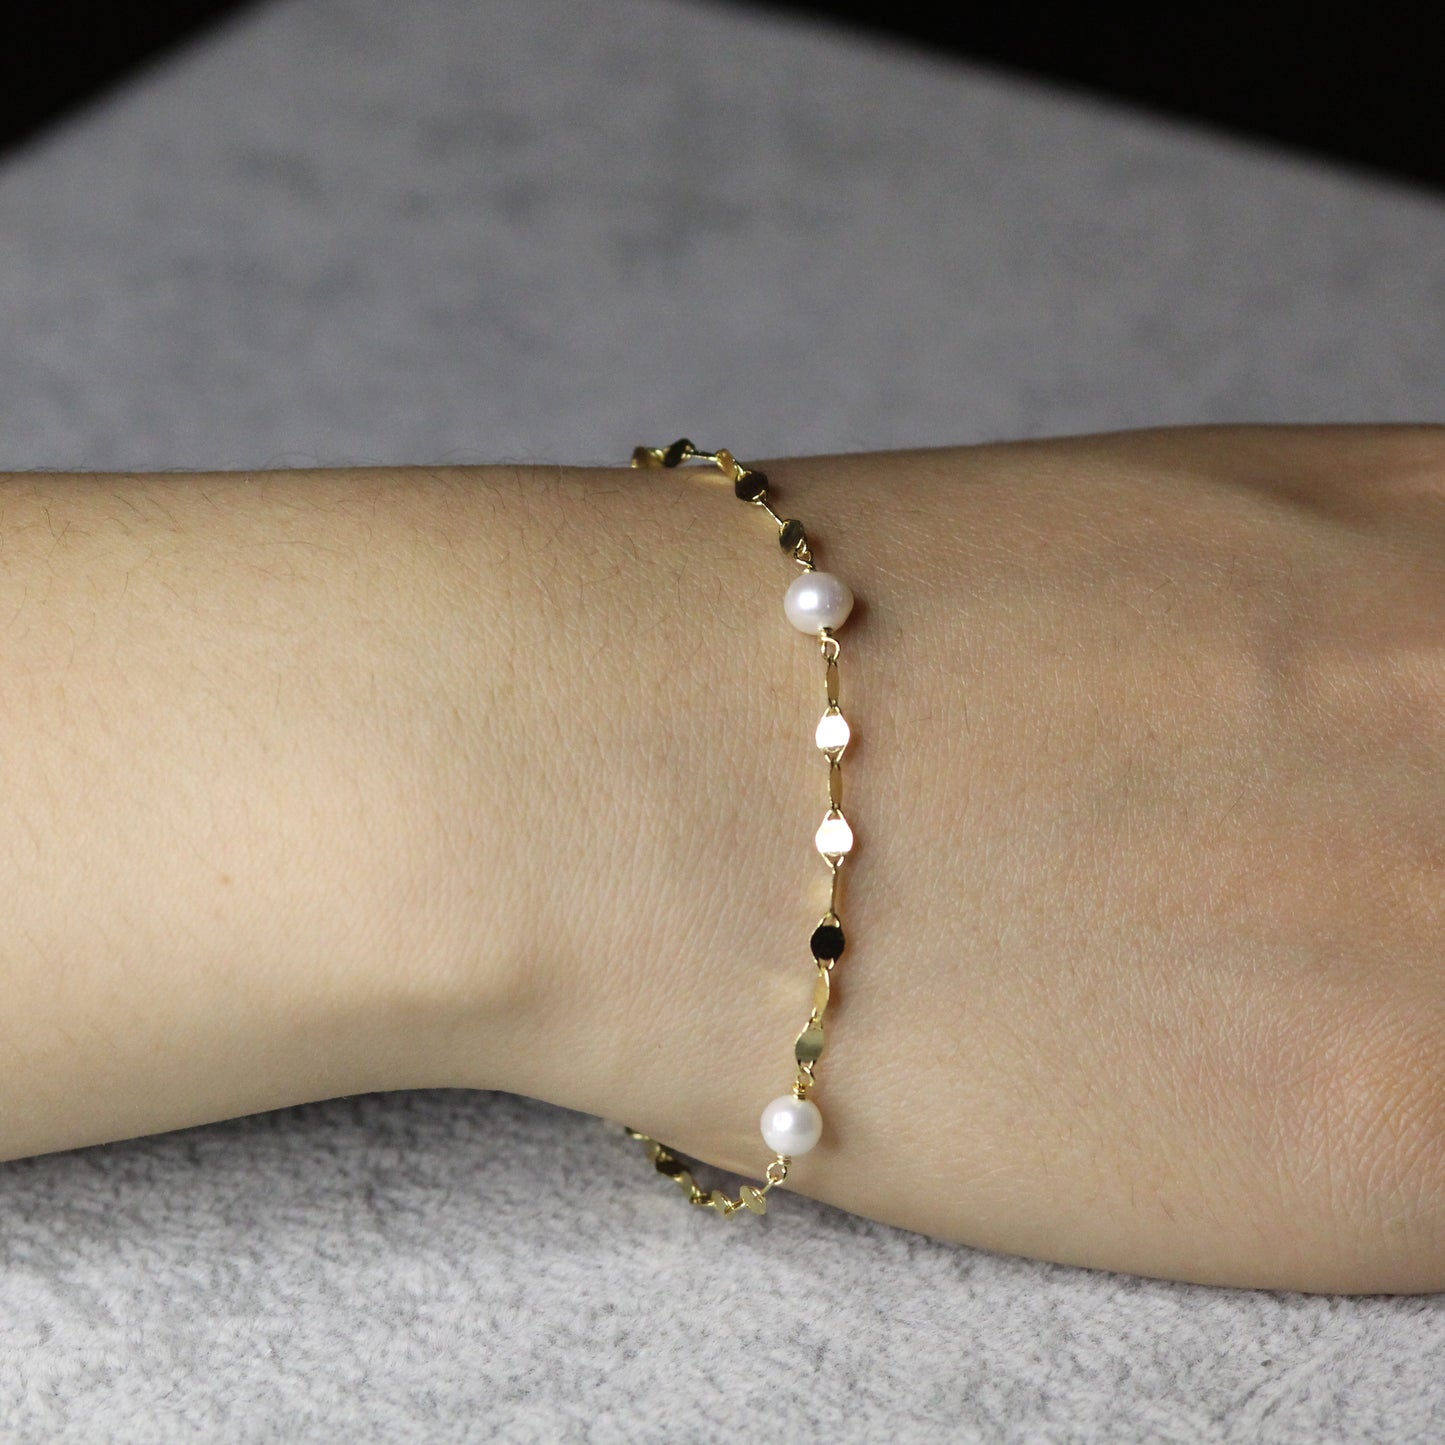 Unique Chain with Natural Pearl Silver Bracelet